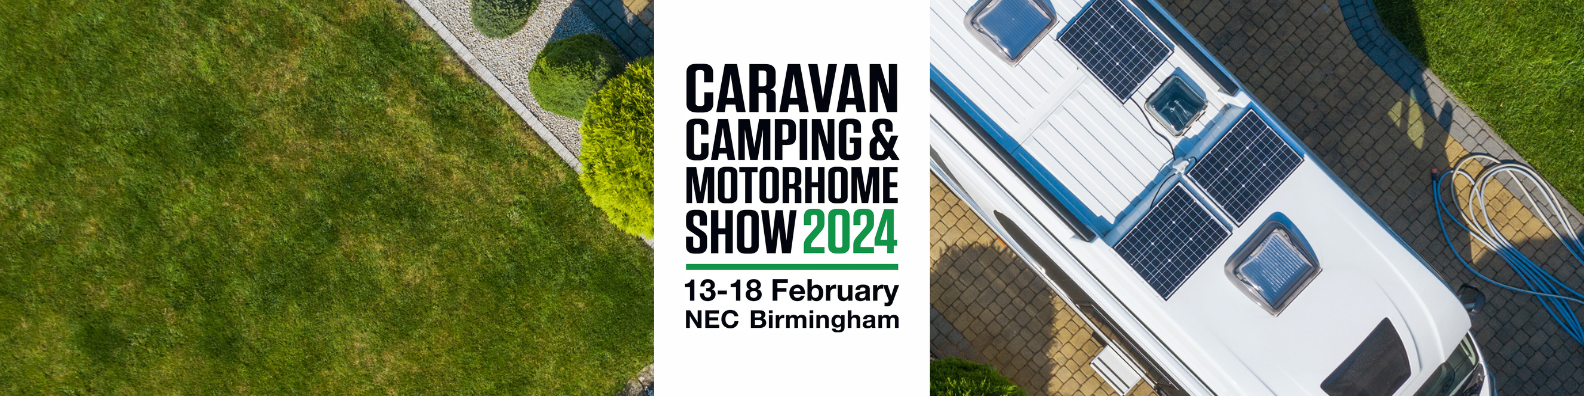 Rev Your Engines for Adventure at the NEC Campervan & Caravan Show!